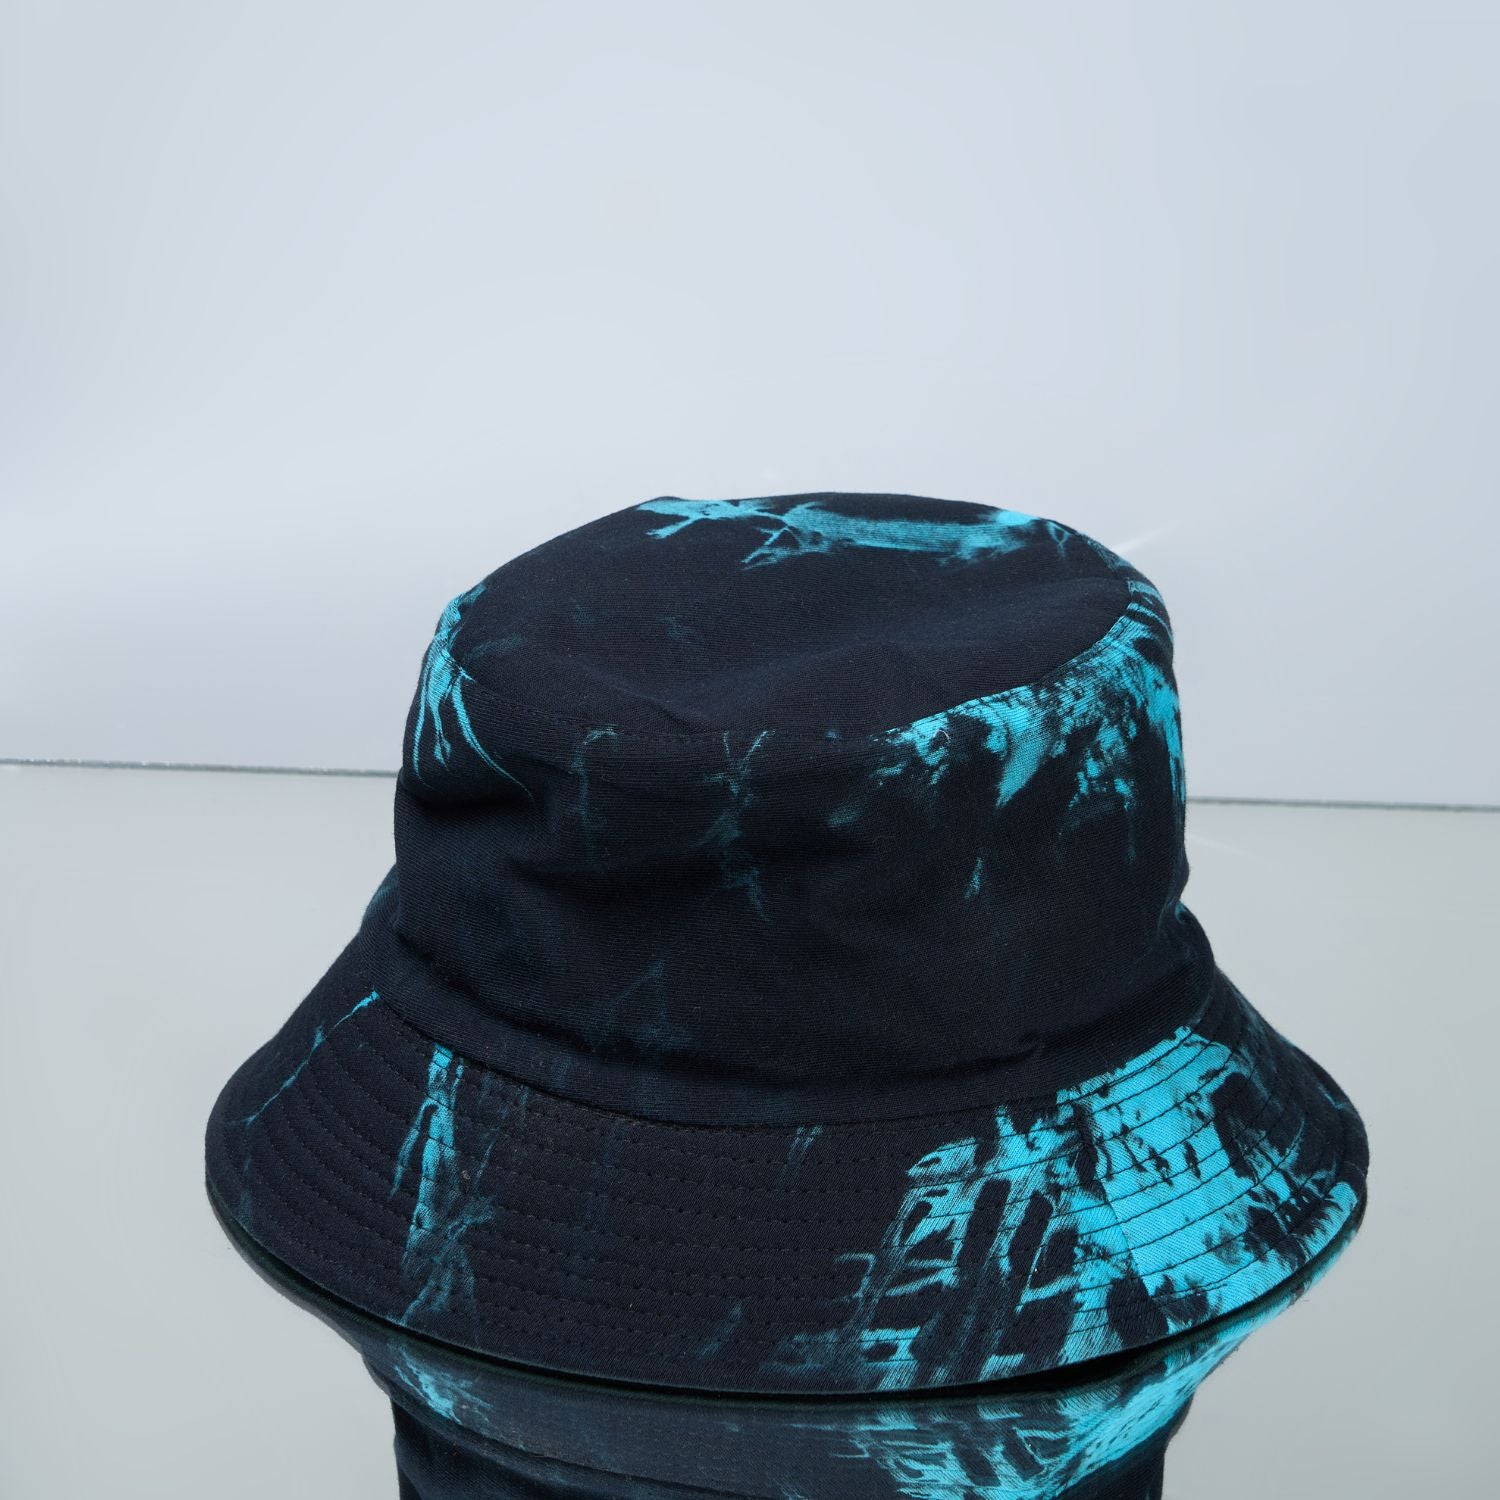 Blue and green colored, lightweight bucket hat for men, close up view.